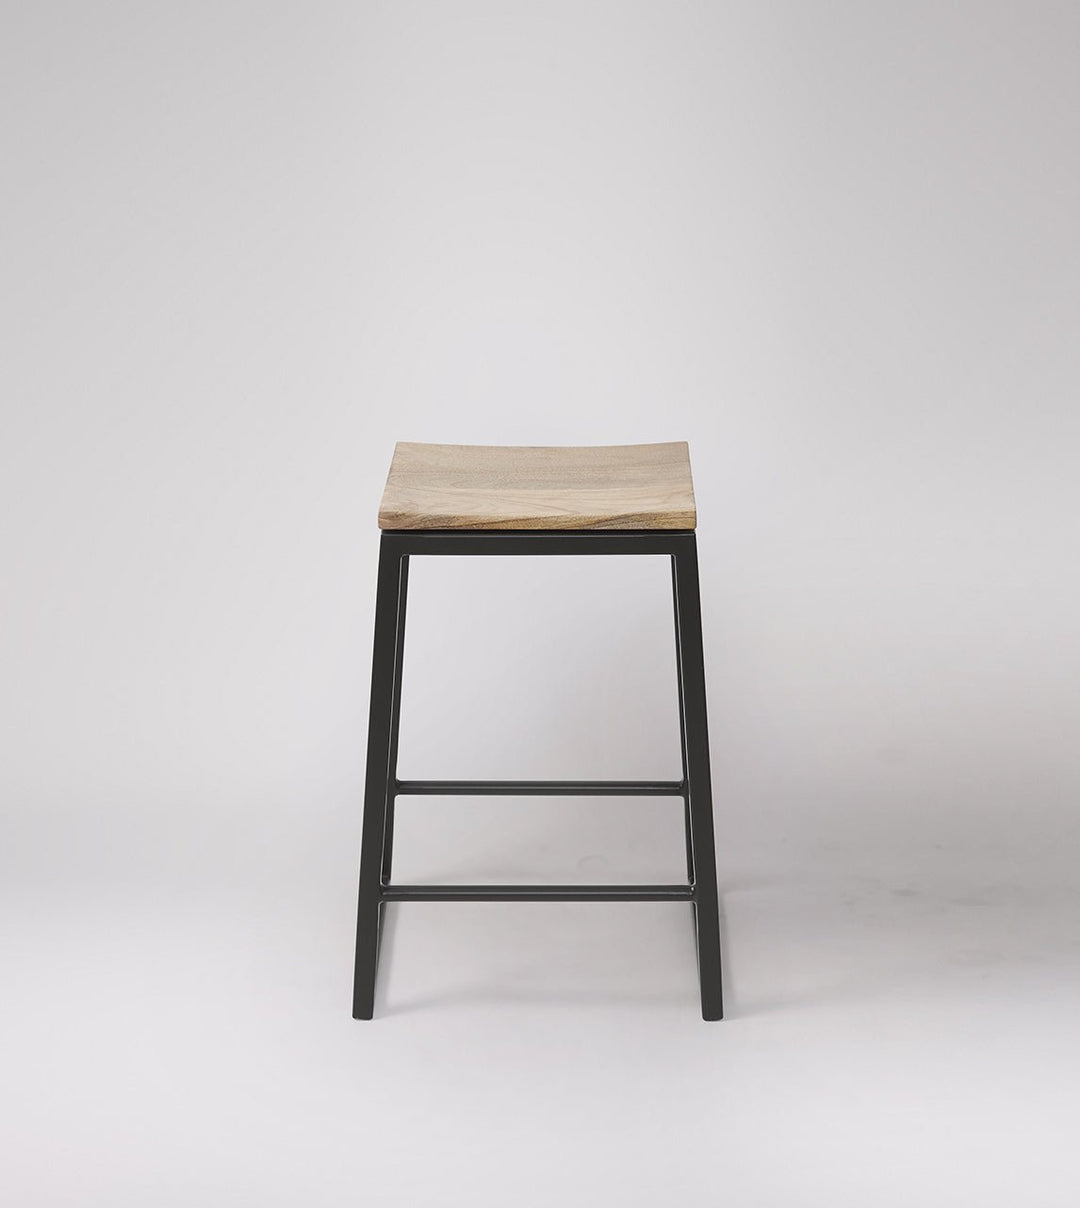 Stool made of solid mango wood and carbon steel - INMARWAR